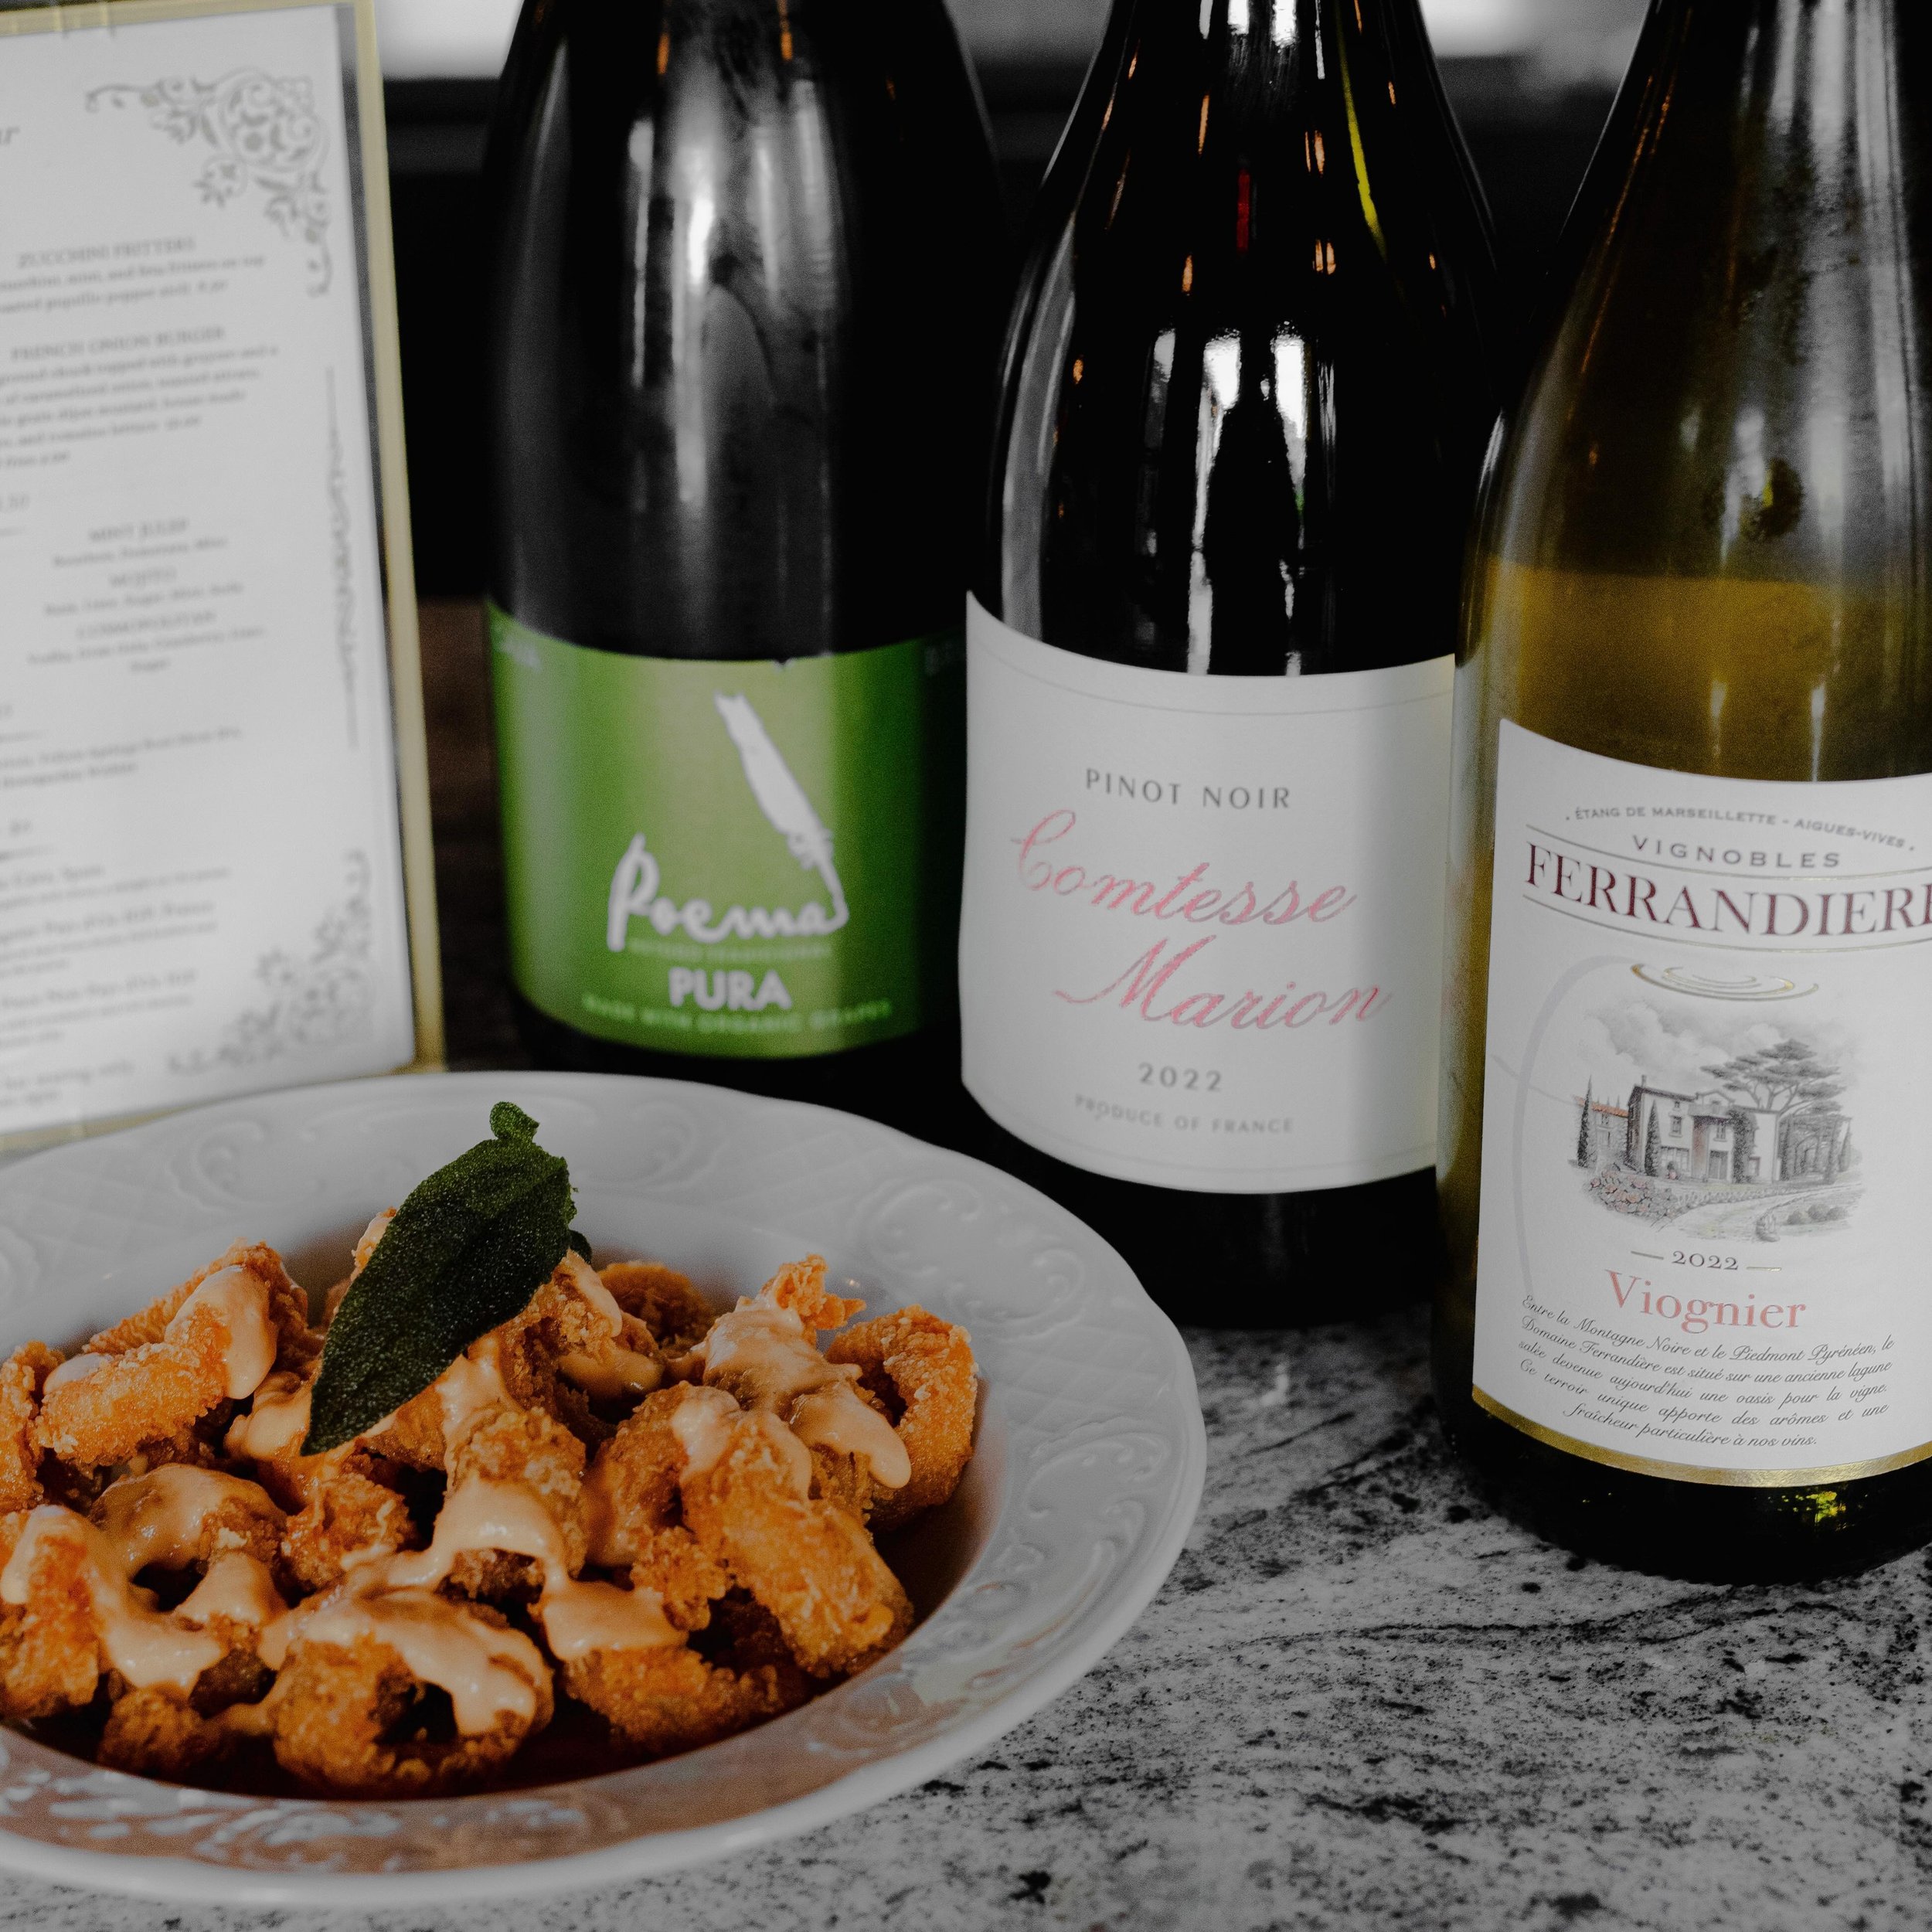 These aren&rsquo;t your average Happy Hour wines! 

Each glass of Poema Pura Organic Brut, Comtesse Marion Pinot Noir and Ferrandi&egrave;re Viognier are just $5 between 2-6pm every weekday 🥂